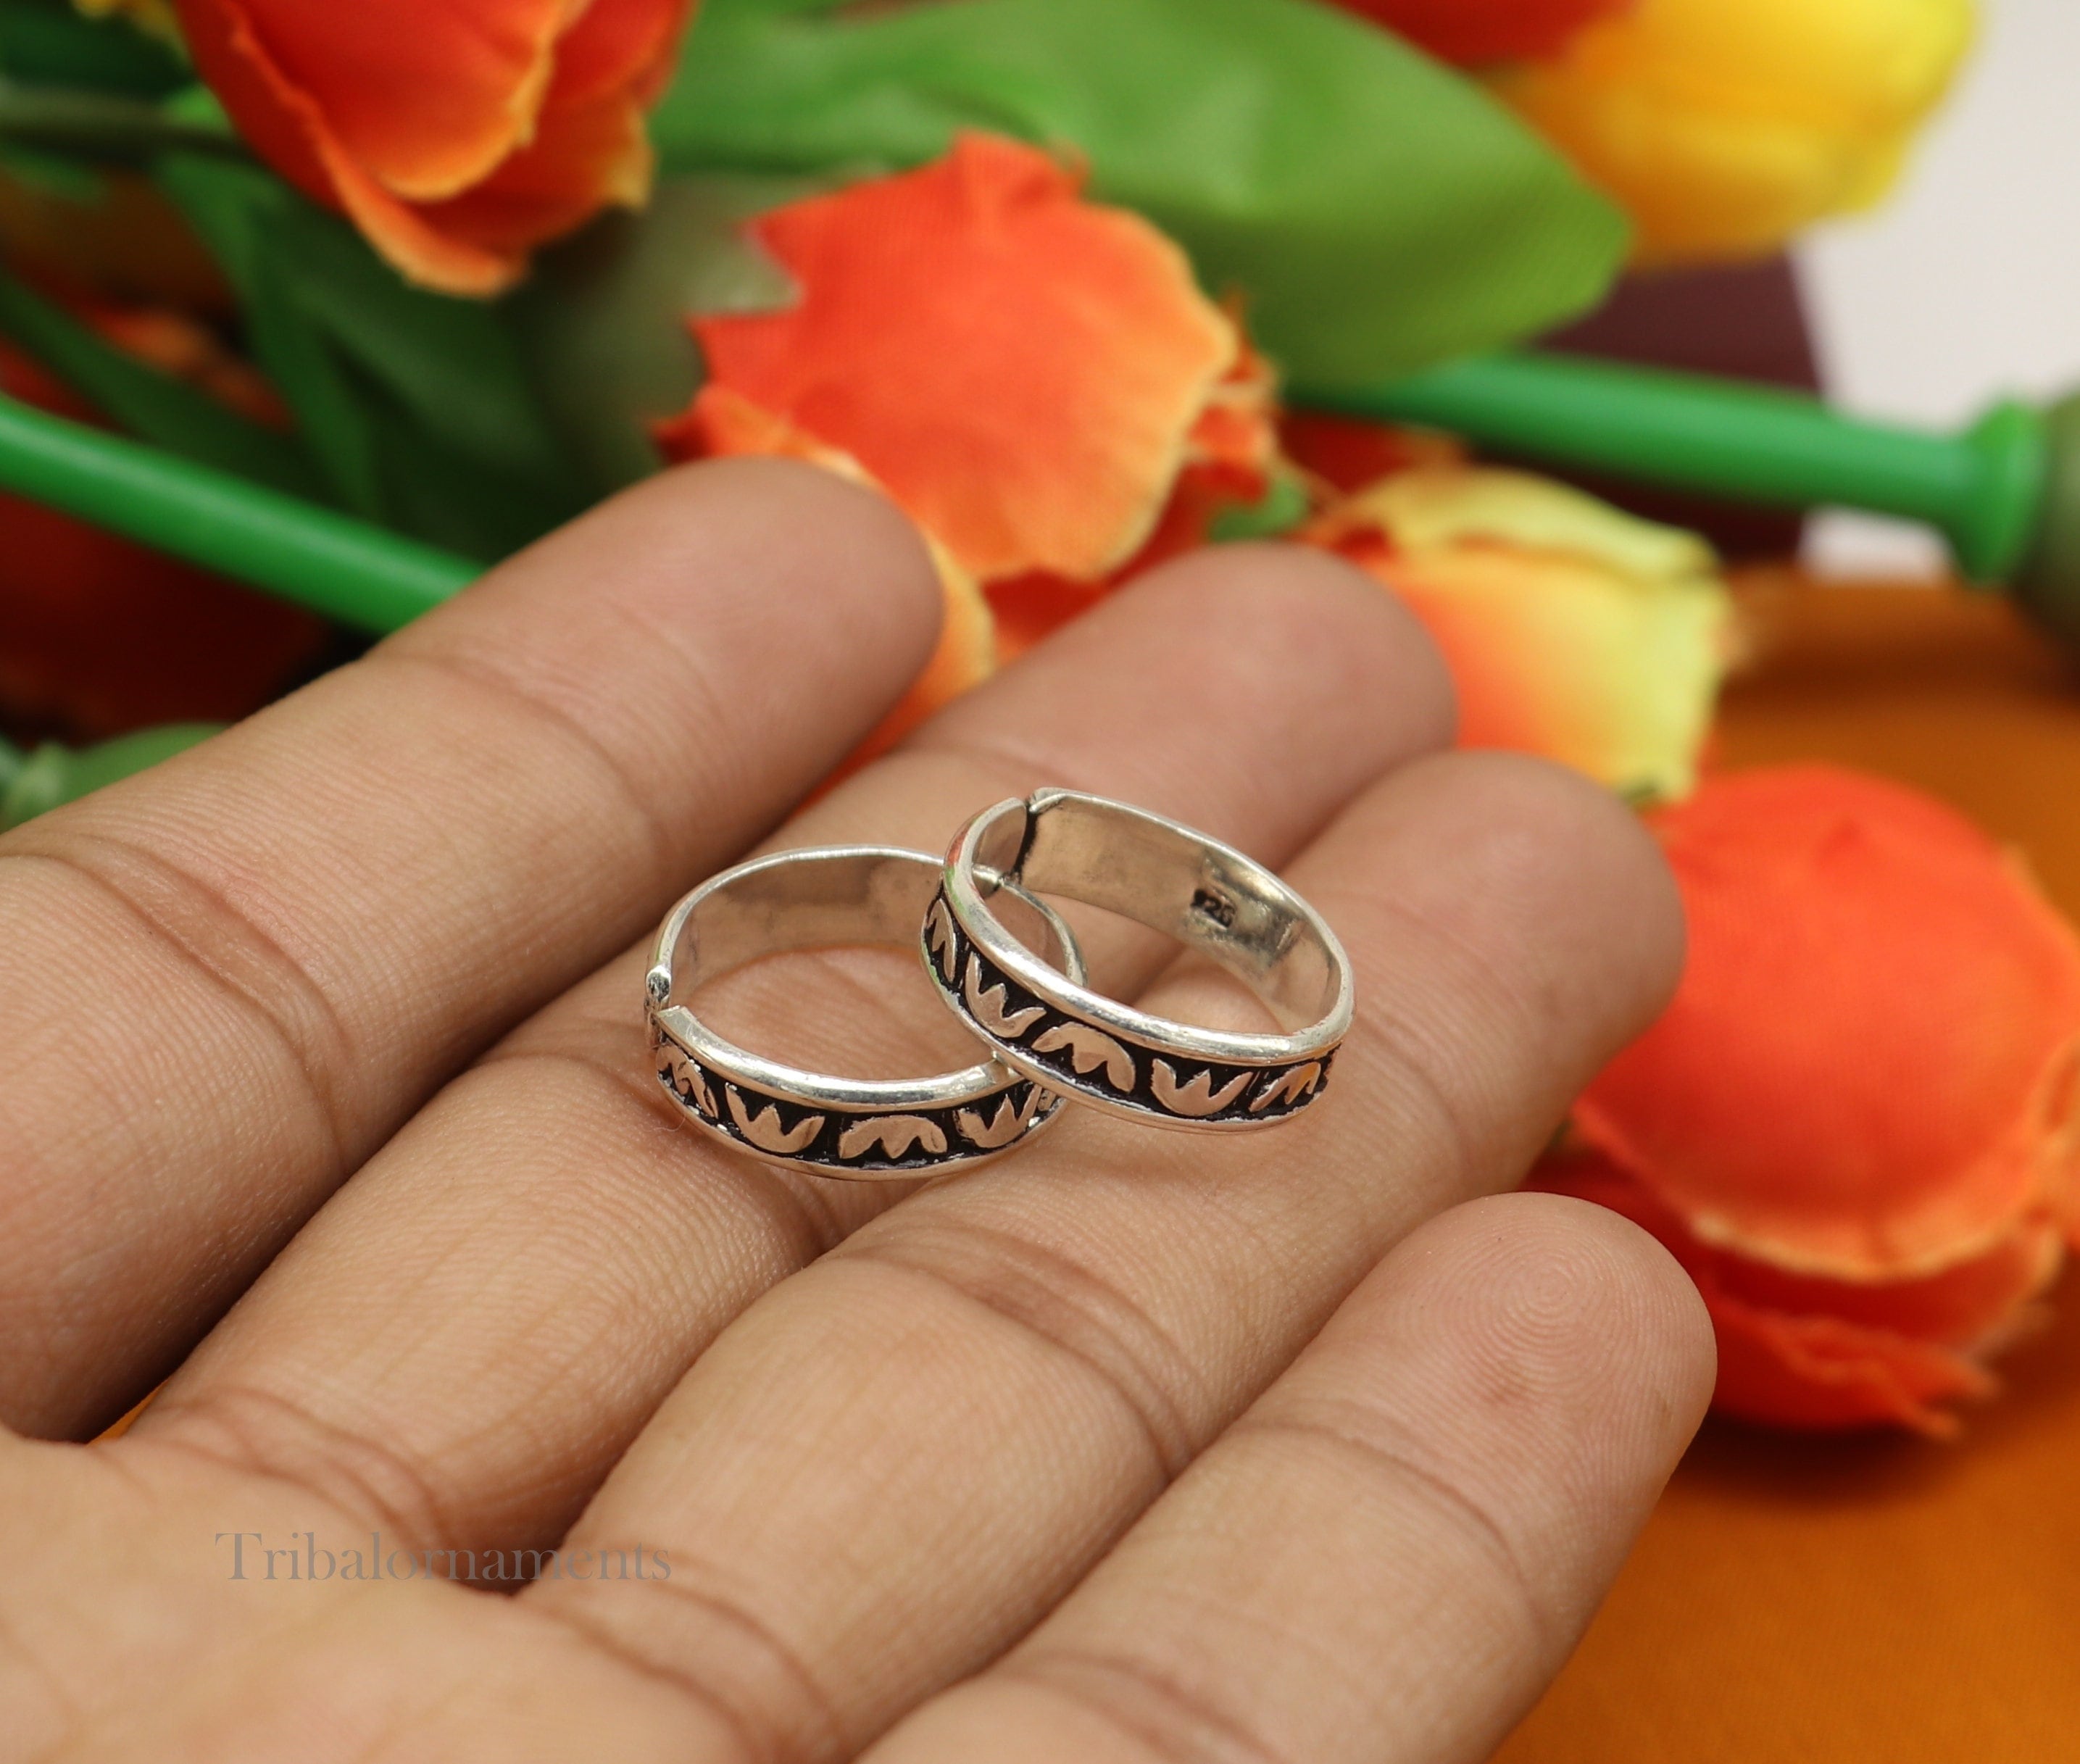 Buy Handmade Silver Ring Online In India - Etsy India